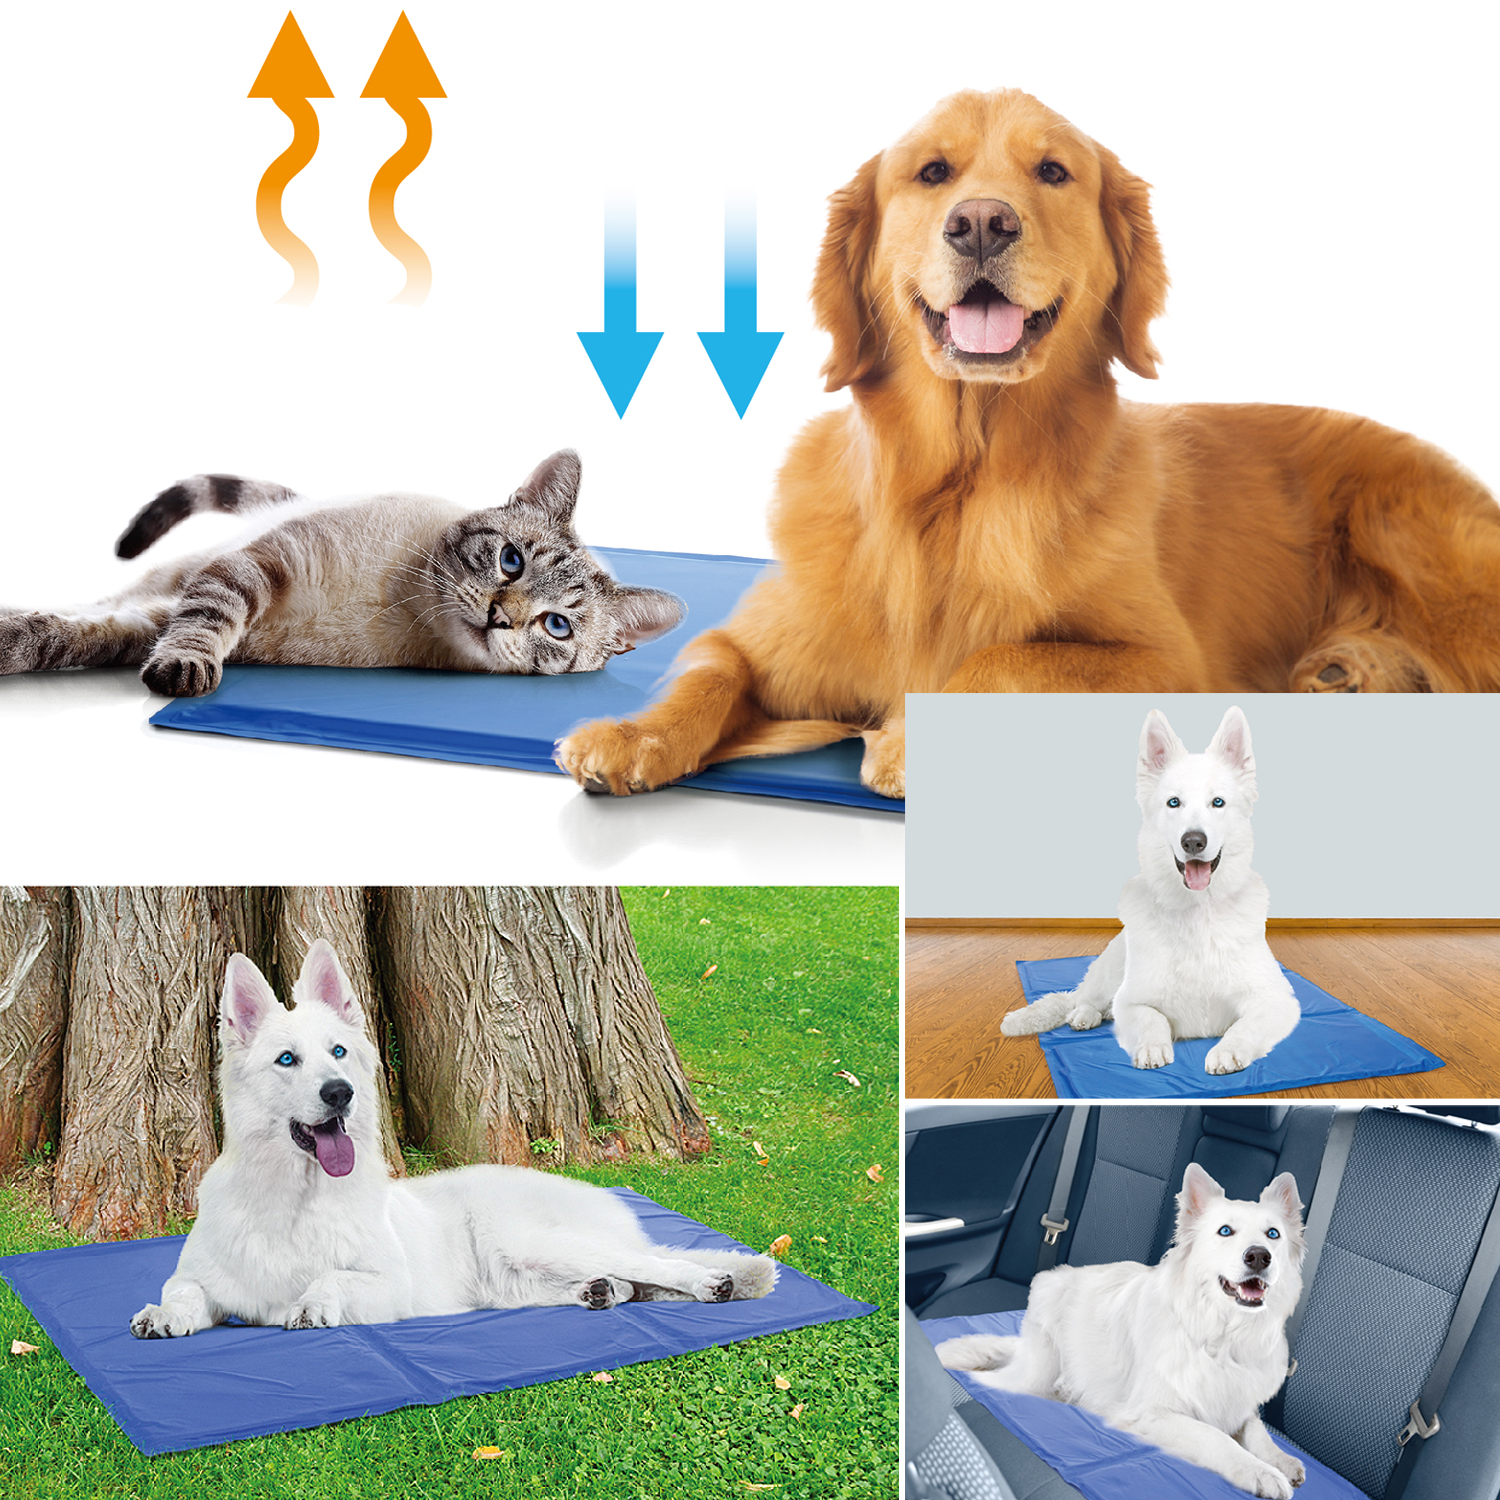 This dog cooling mat is a special type of mat designed to keep dogs comfortable and cool, especially during hot summer months. This makes the mat a great option for dogs who overheat easily, or for owners looking for a way to keep their pet comfortable during warm weather.